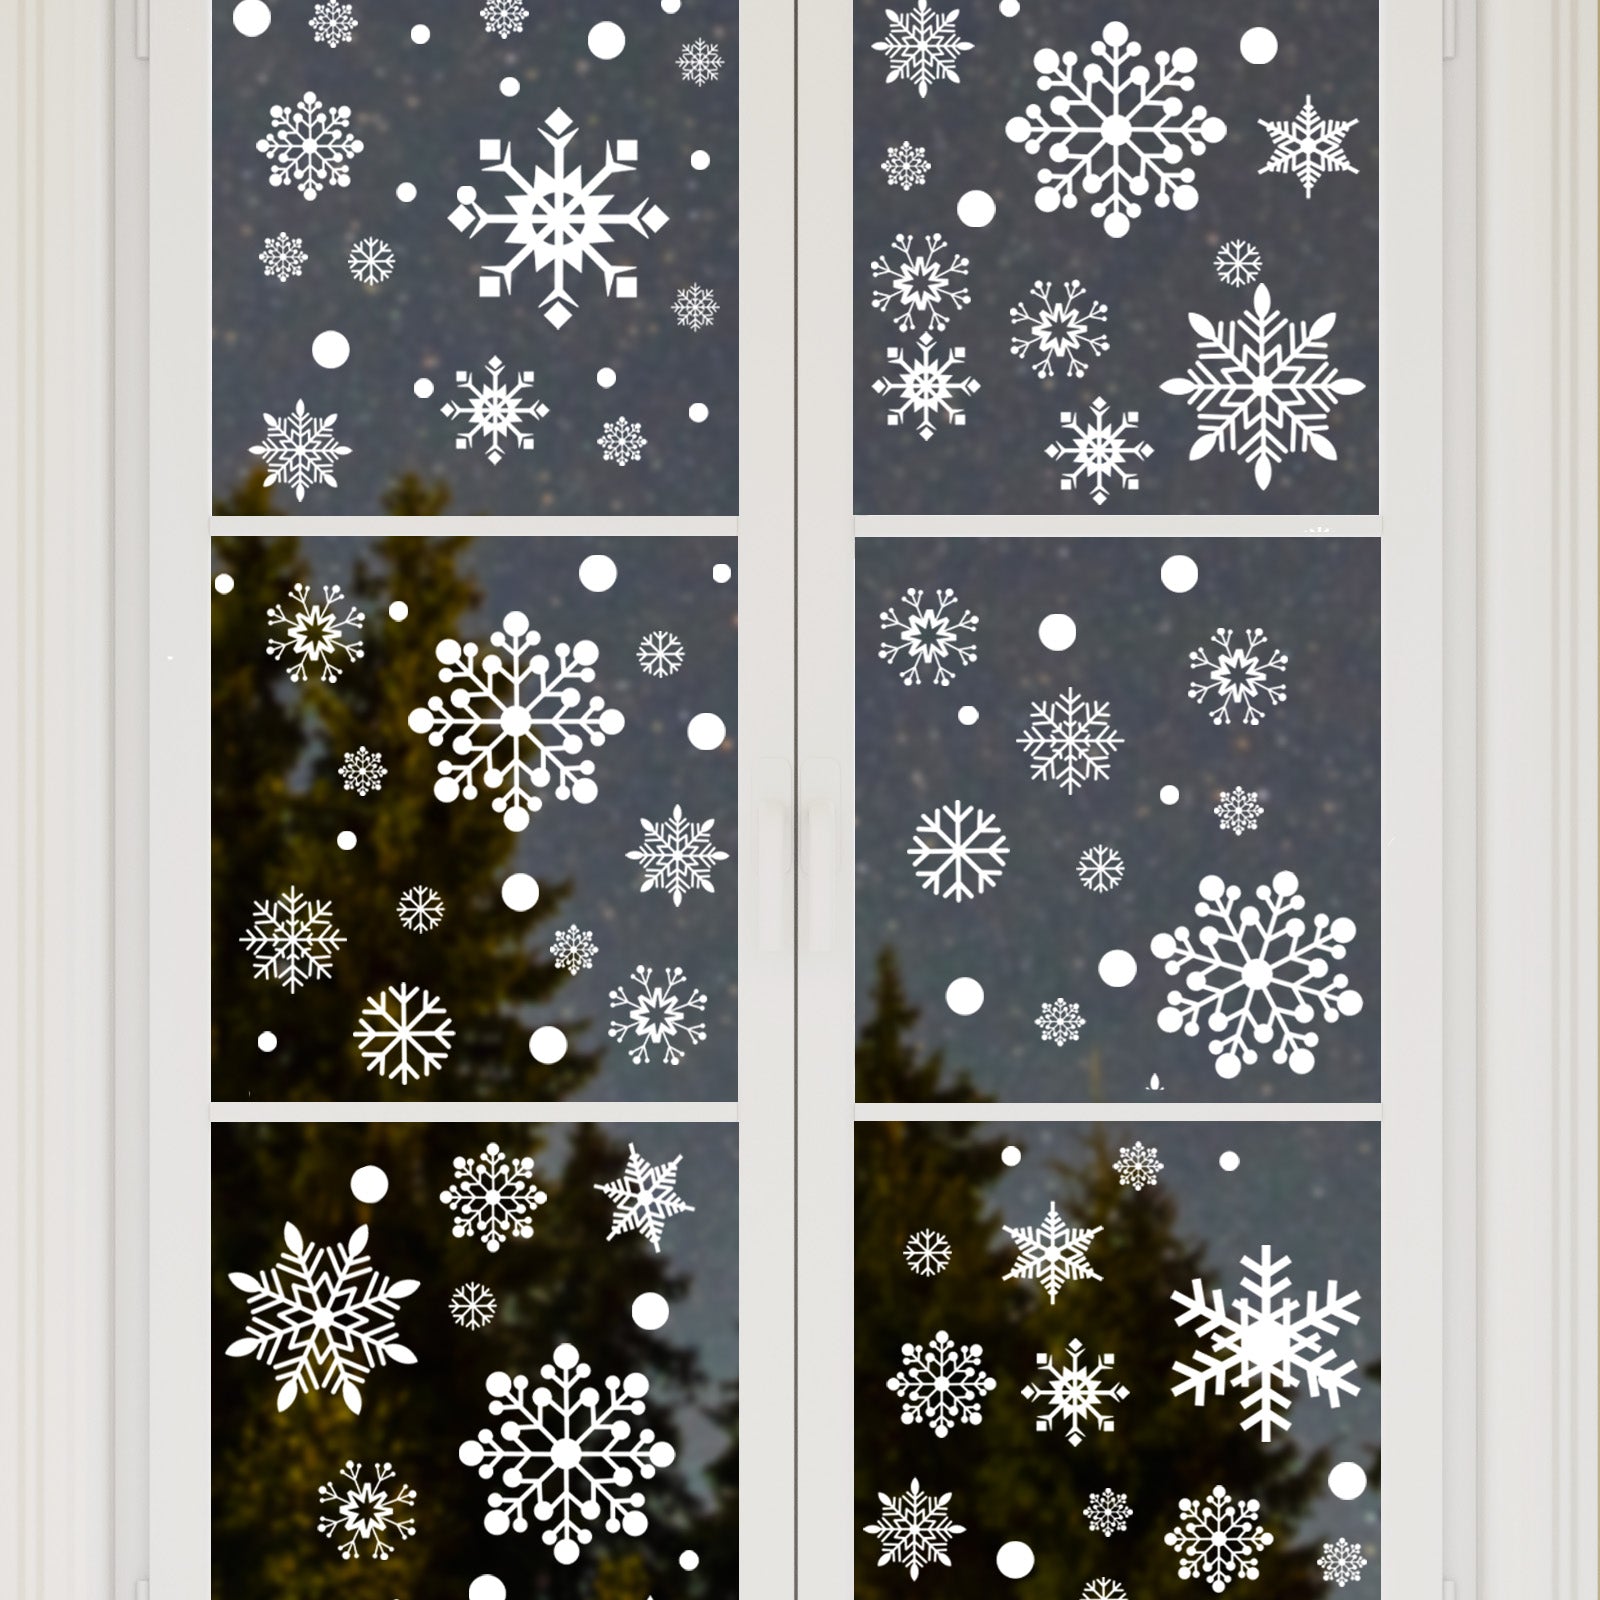 Wrapables Snowflake Window Clings Decal Stickers, Christmas Winter Decoration for Glass Windows 9pc Starry